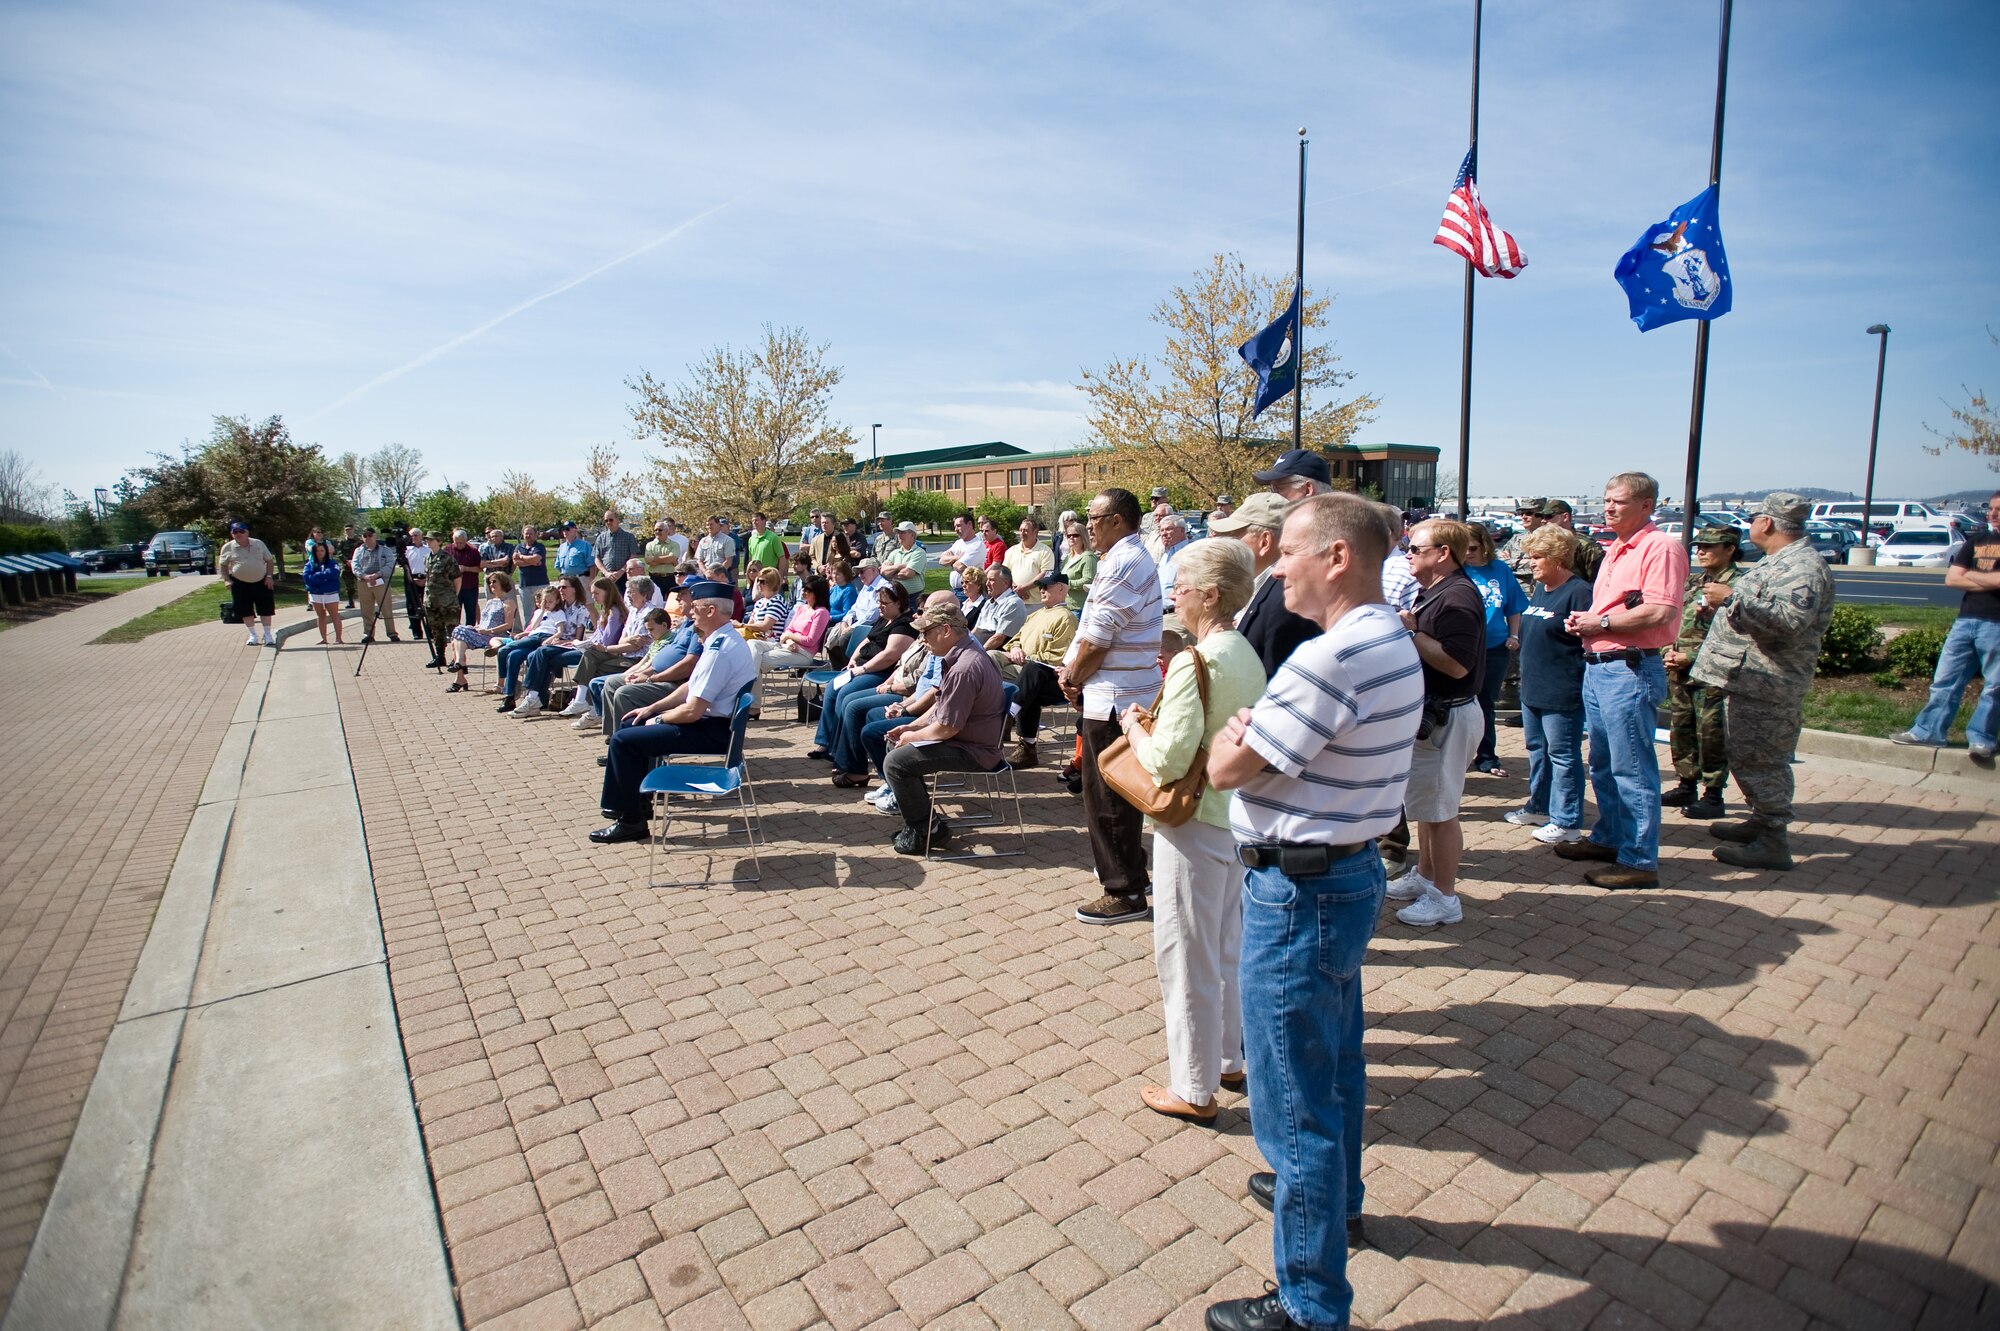 Retirees of the Kentucky Air National Guard attend a retiree plaque dedication ceremony at the Kentucky Air Guard Base in Louisville, Ky., on April 18. (USAF Photo by Capt. Dale Greer)